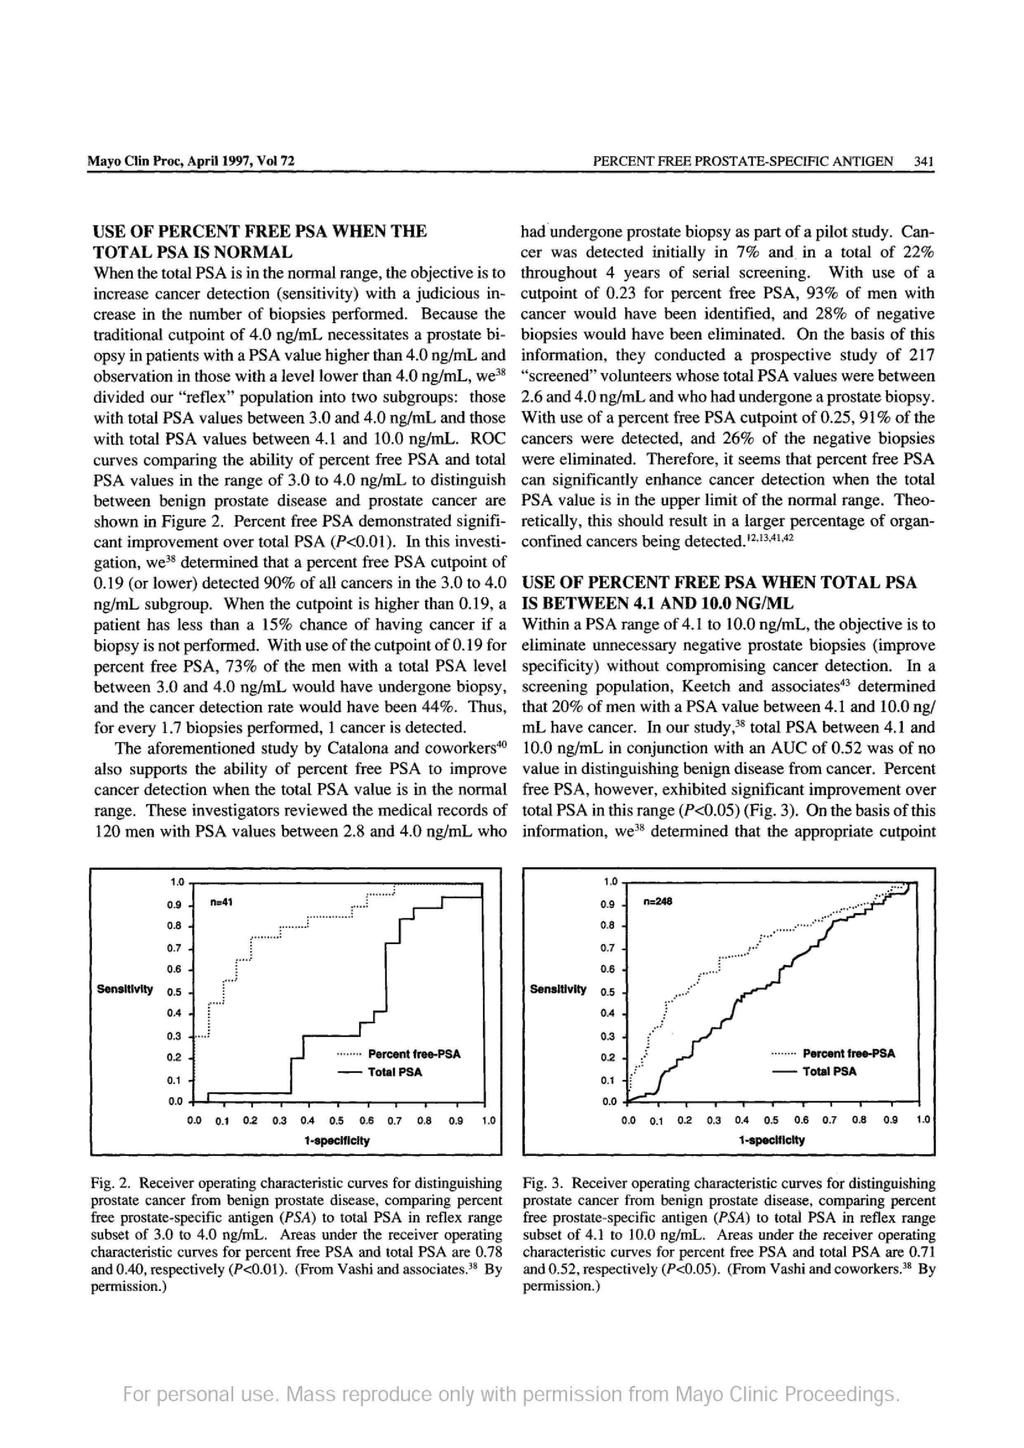 Mayo Clin Proc, April 1997, Vol 72 PERCENT FREE PROSTATE-SPECIFIC ANTIGEN 341 USE OF PERCENT FREE PSA WHEN THE TOTAL PSA IS NORMAL When the total PSA is in the normal range, the objective is to